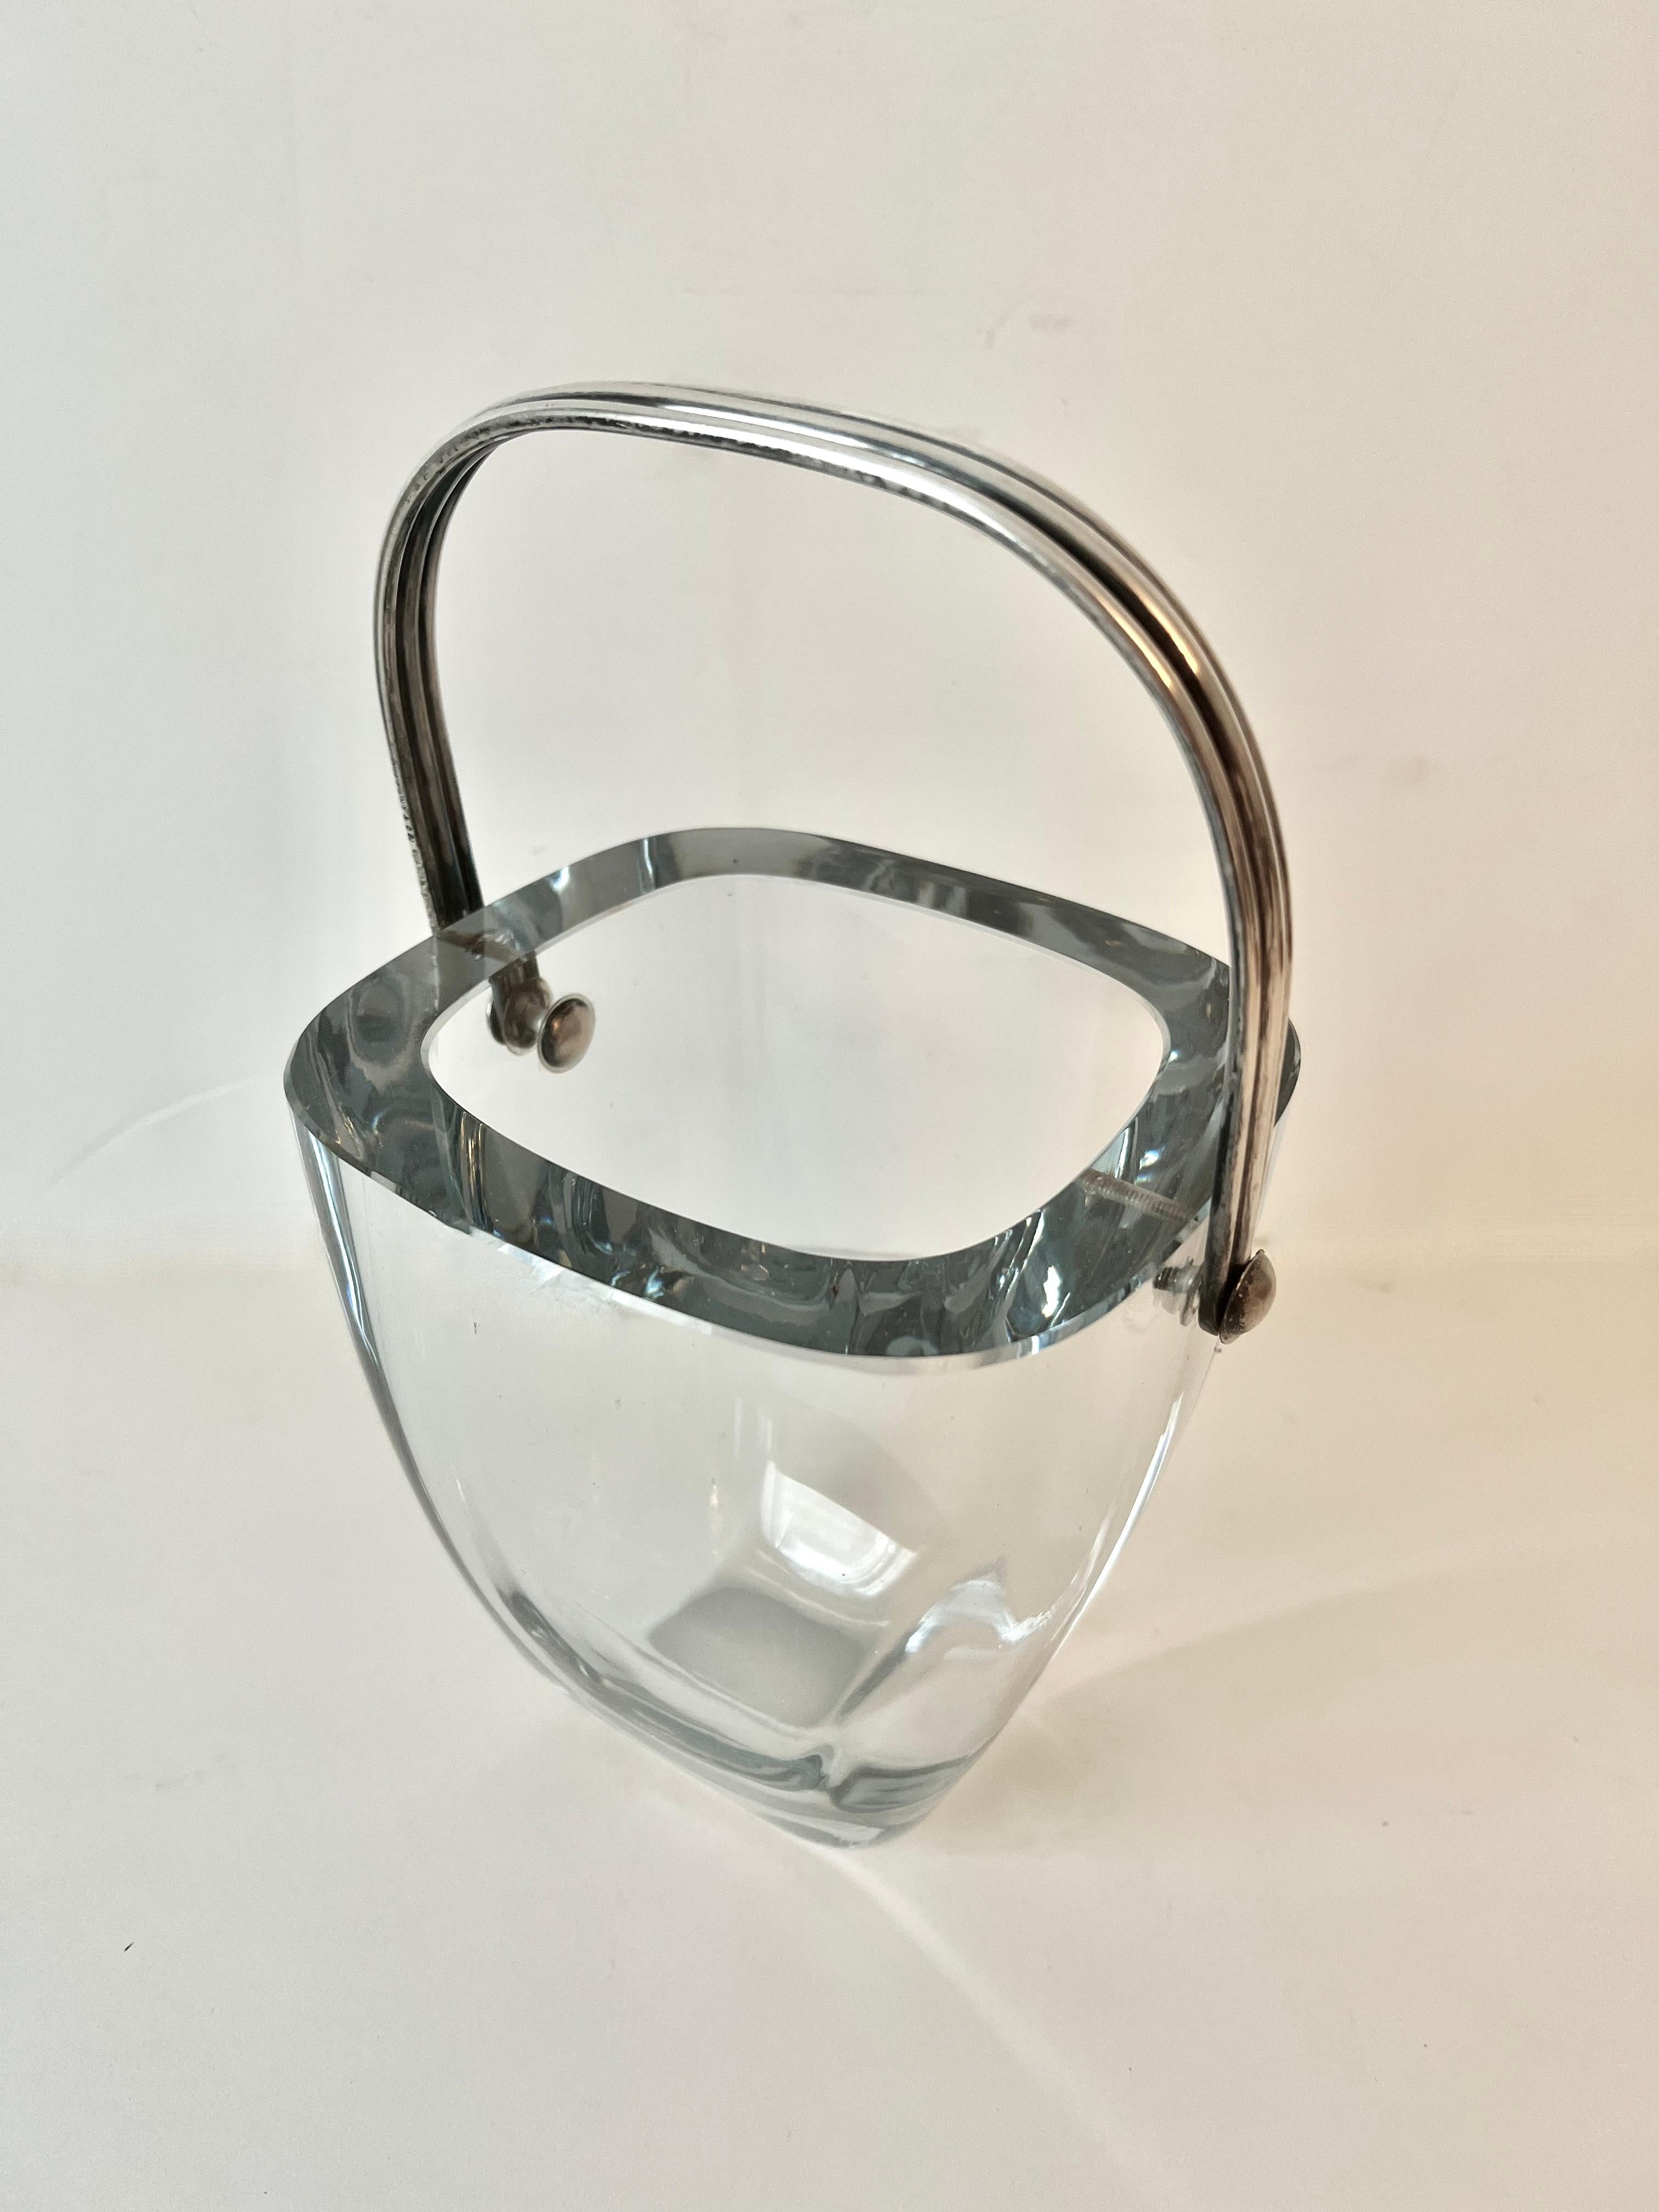 A stunning Tiffany and Co. Art Deco Crystal ice bucket with sterling silver handle.  The crystal is a beefy 3/4